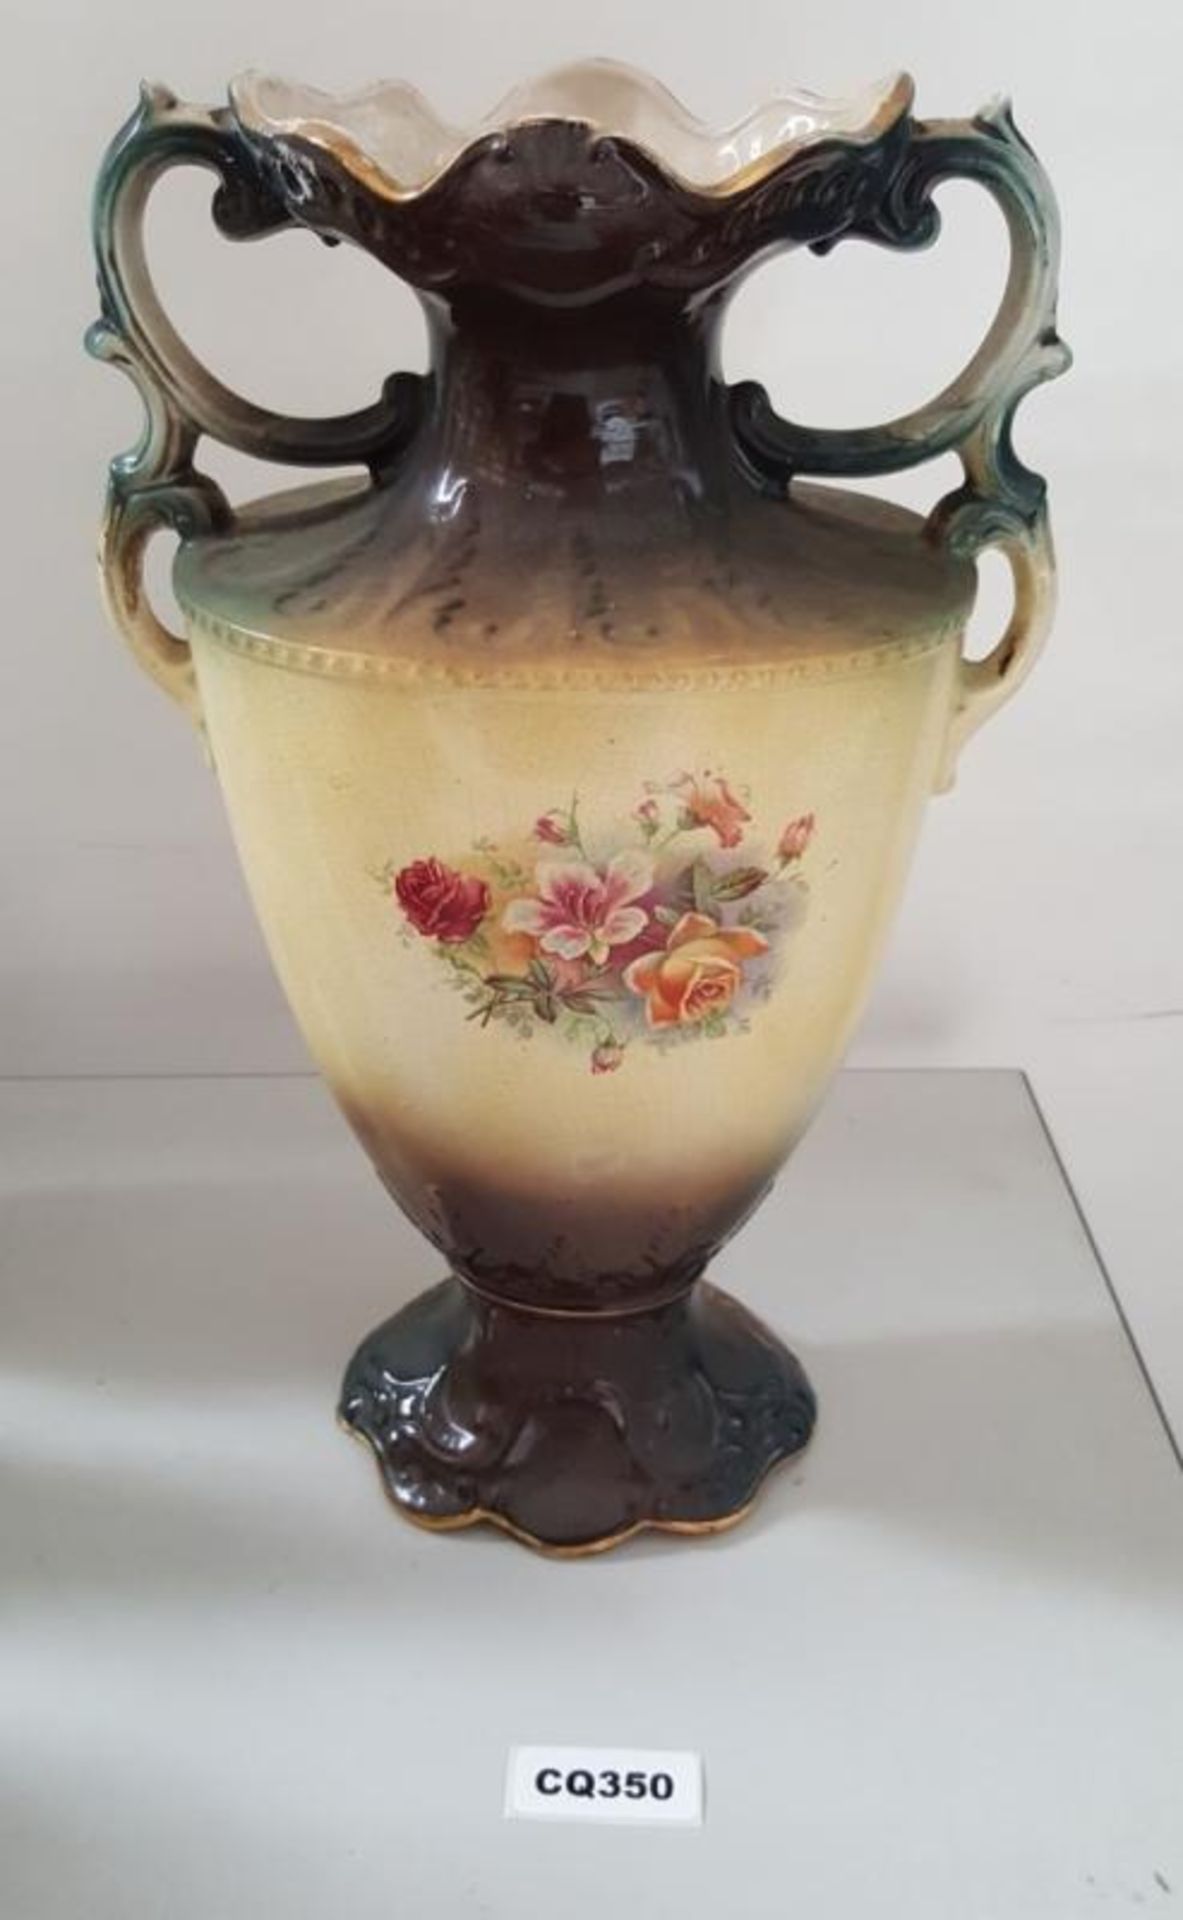 1 x Antique Victorian Porcelain Vase Trophy Shaped In Dark Shade With A Flower Print( Made In Englan - Image 2 of 3